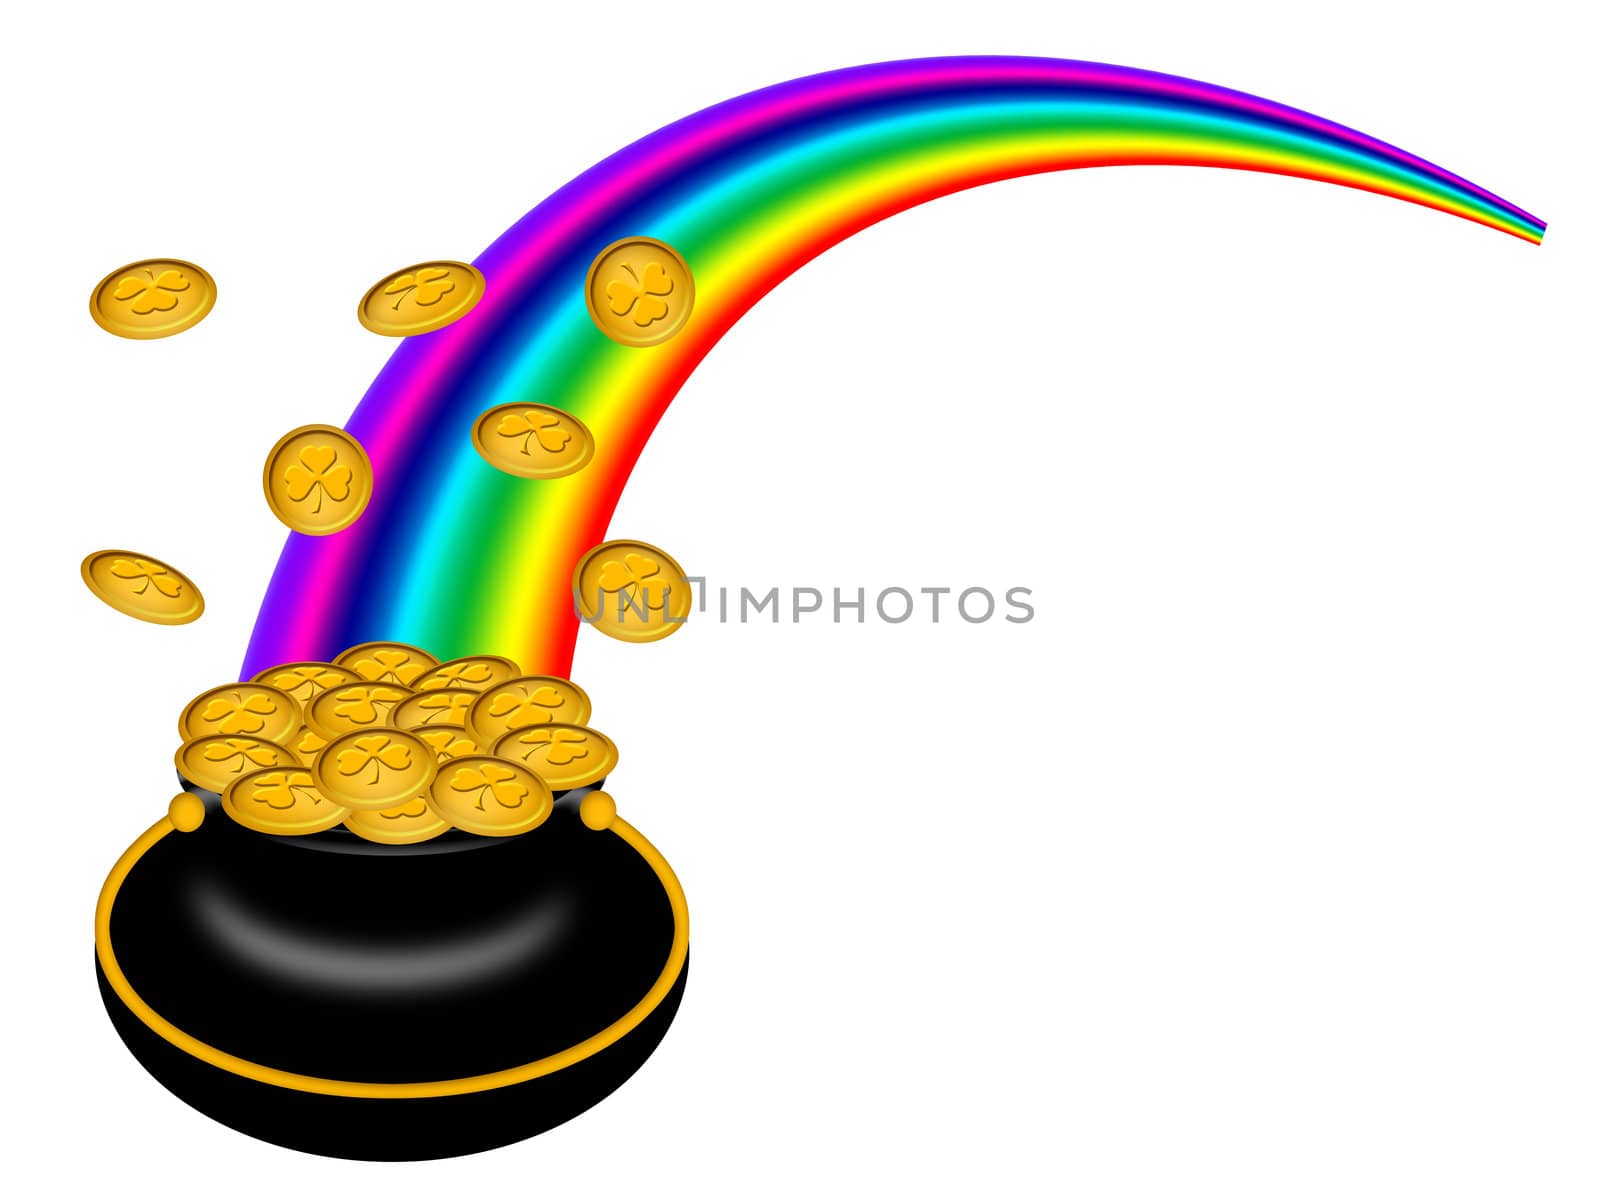 Saint Patricks Day Pot of Gold with Shamrock Coins and Rainbow Illustration